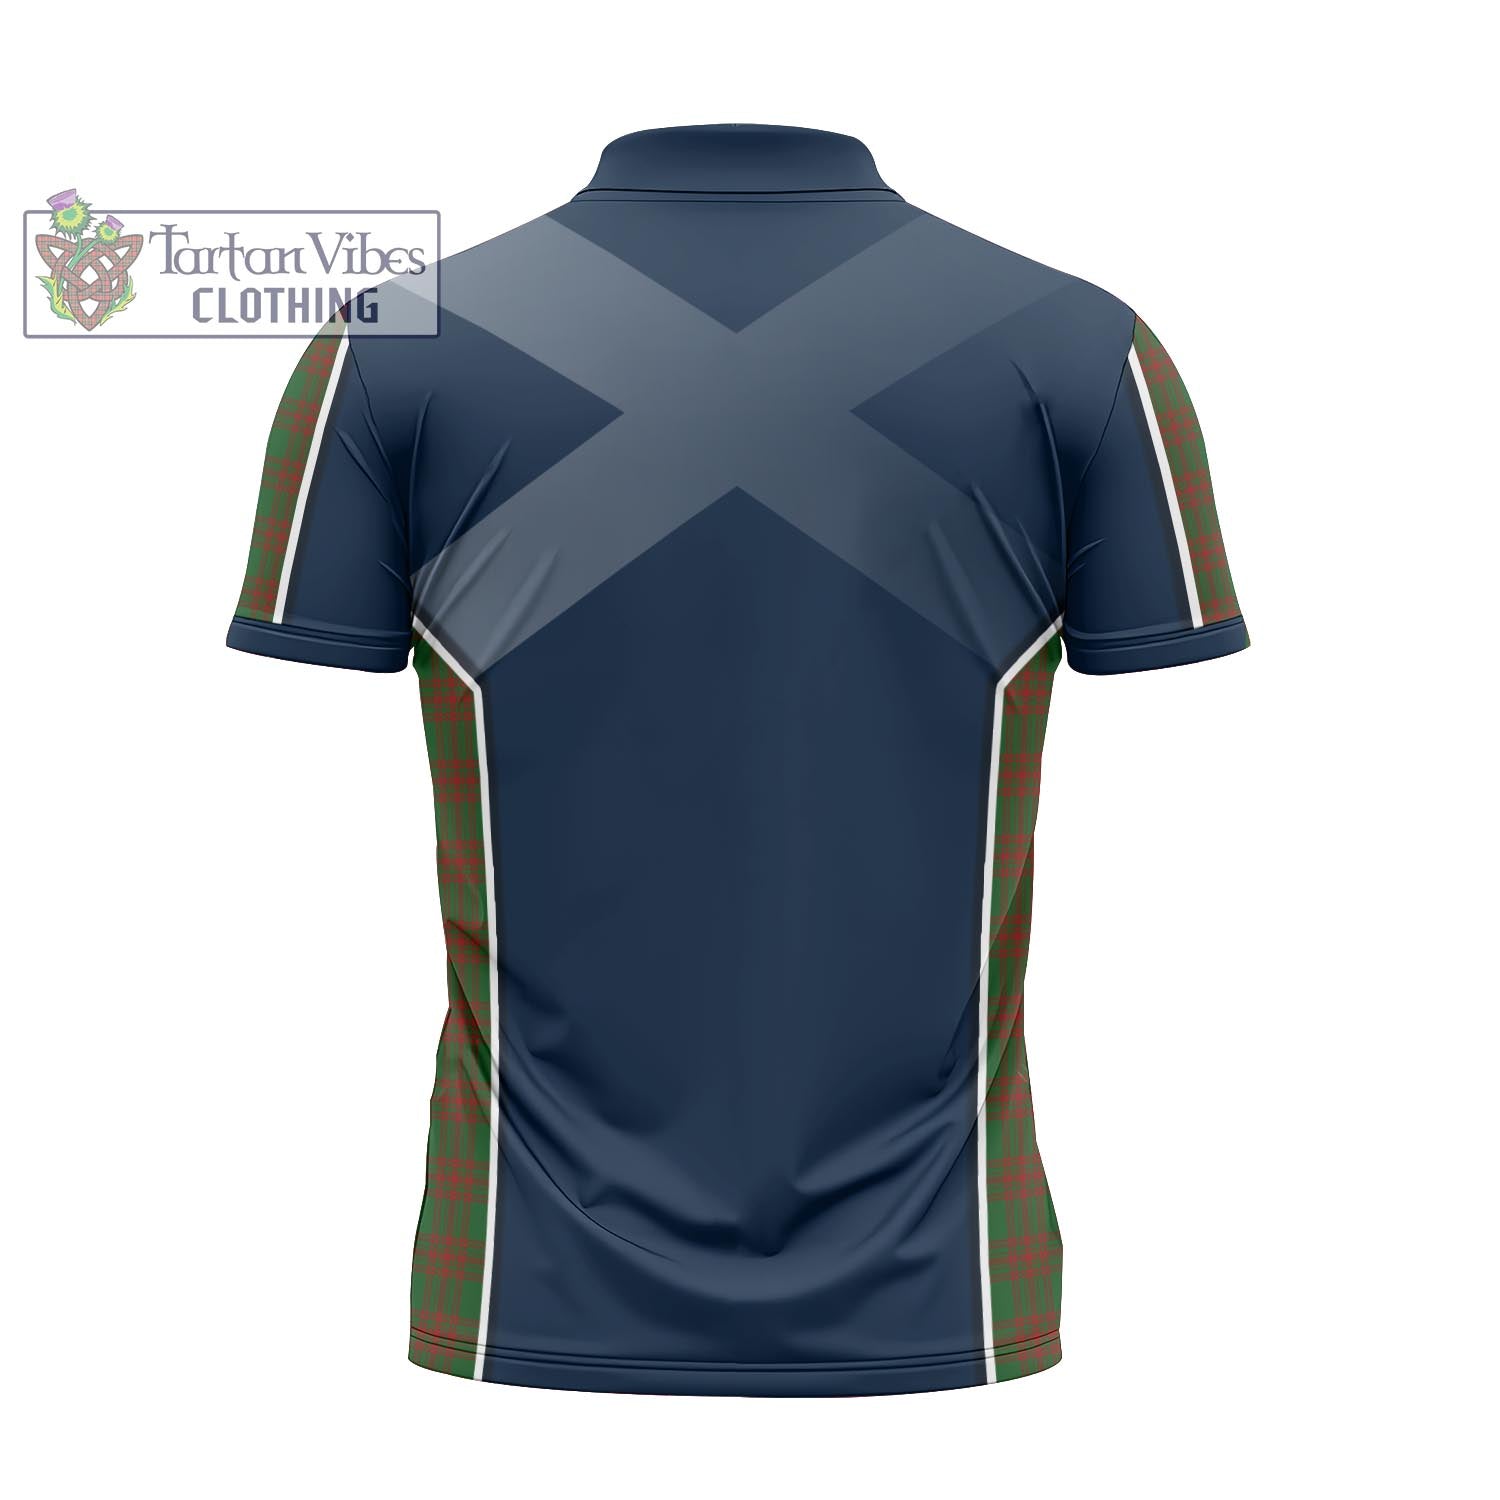 Tartan Vibes Clothing Menzies Tartan Zipper Polo Shirt with Family Crest and Lion Rampant Vibes Sport Style